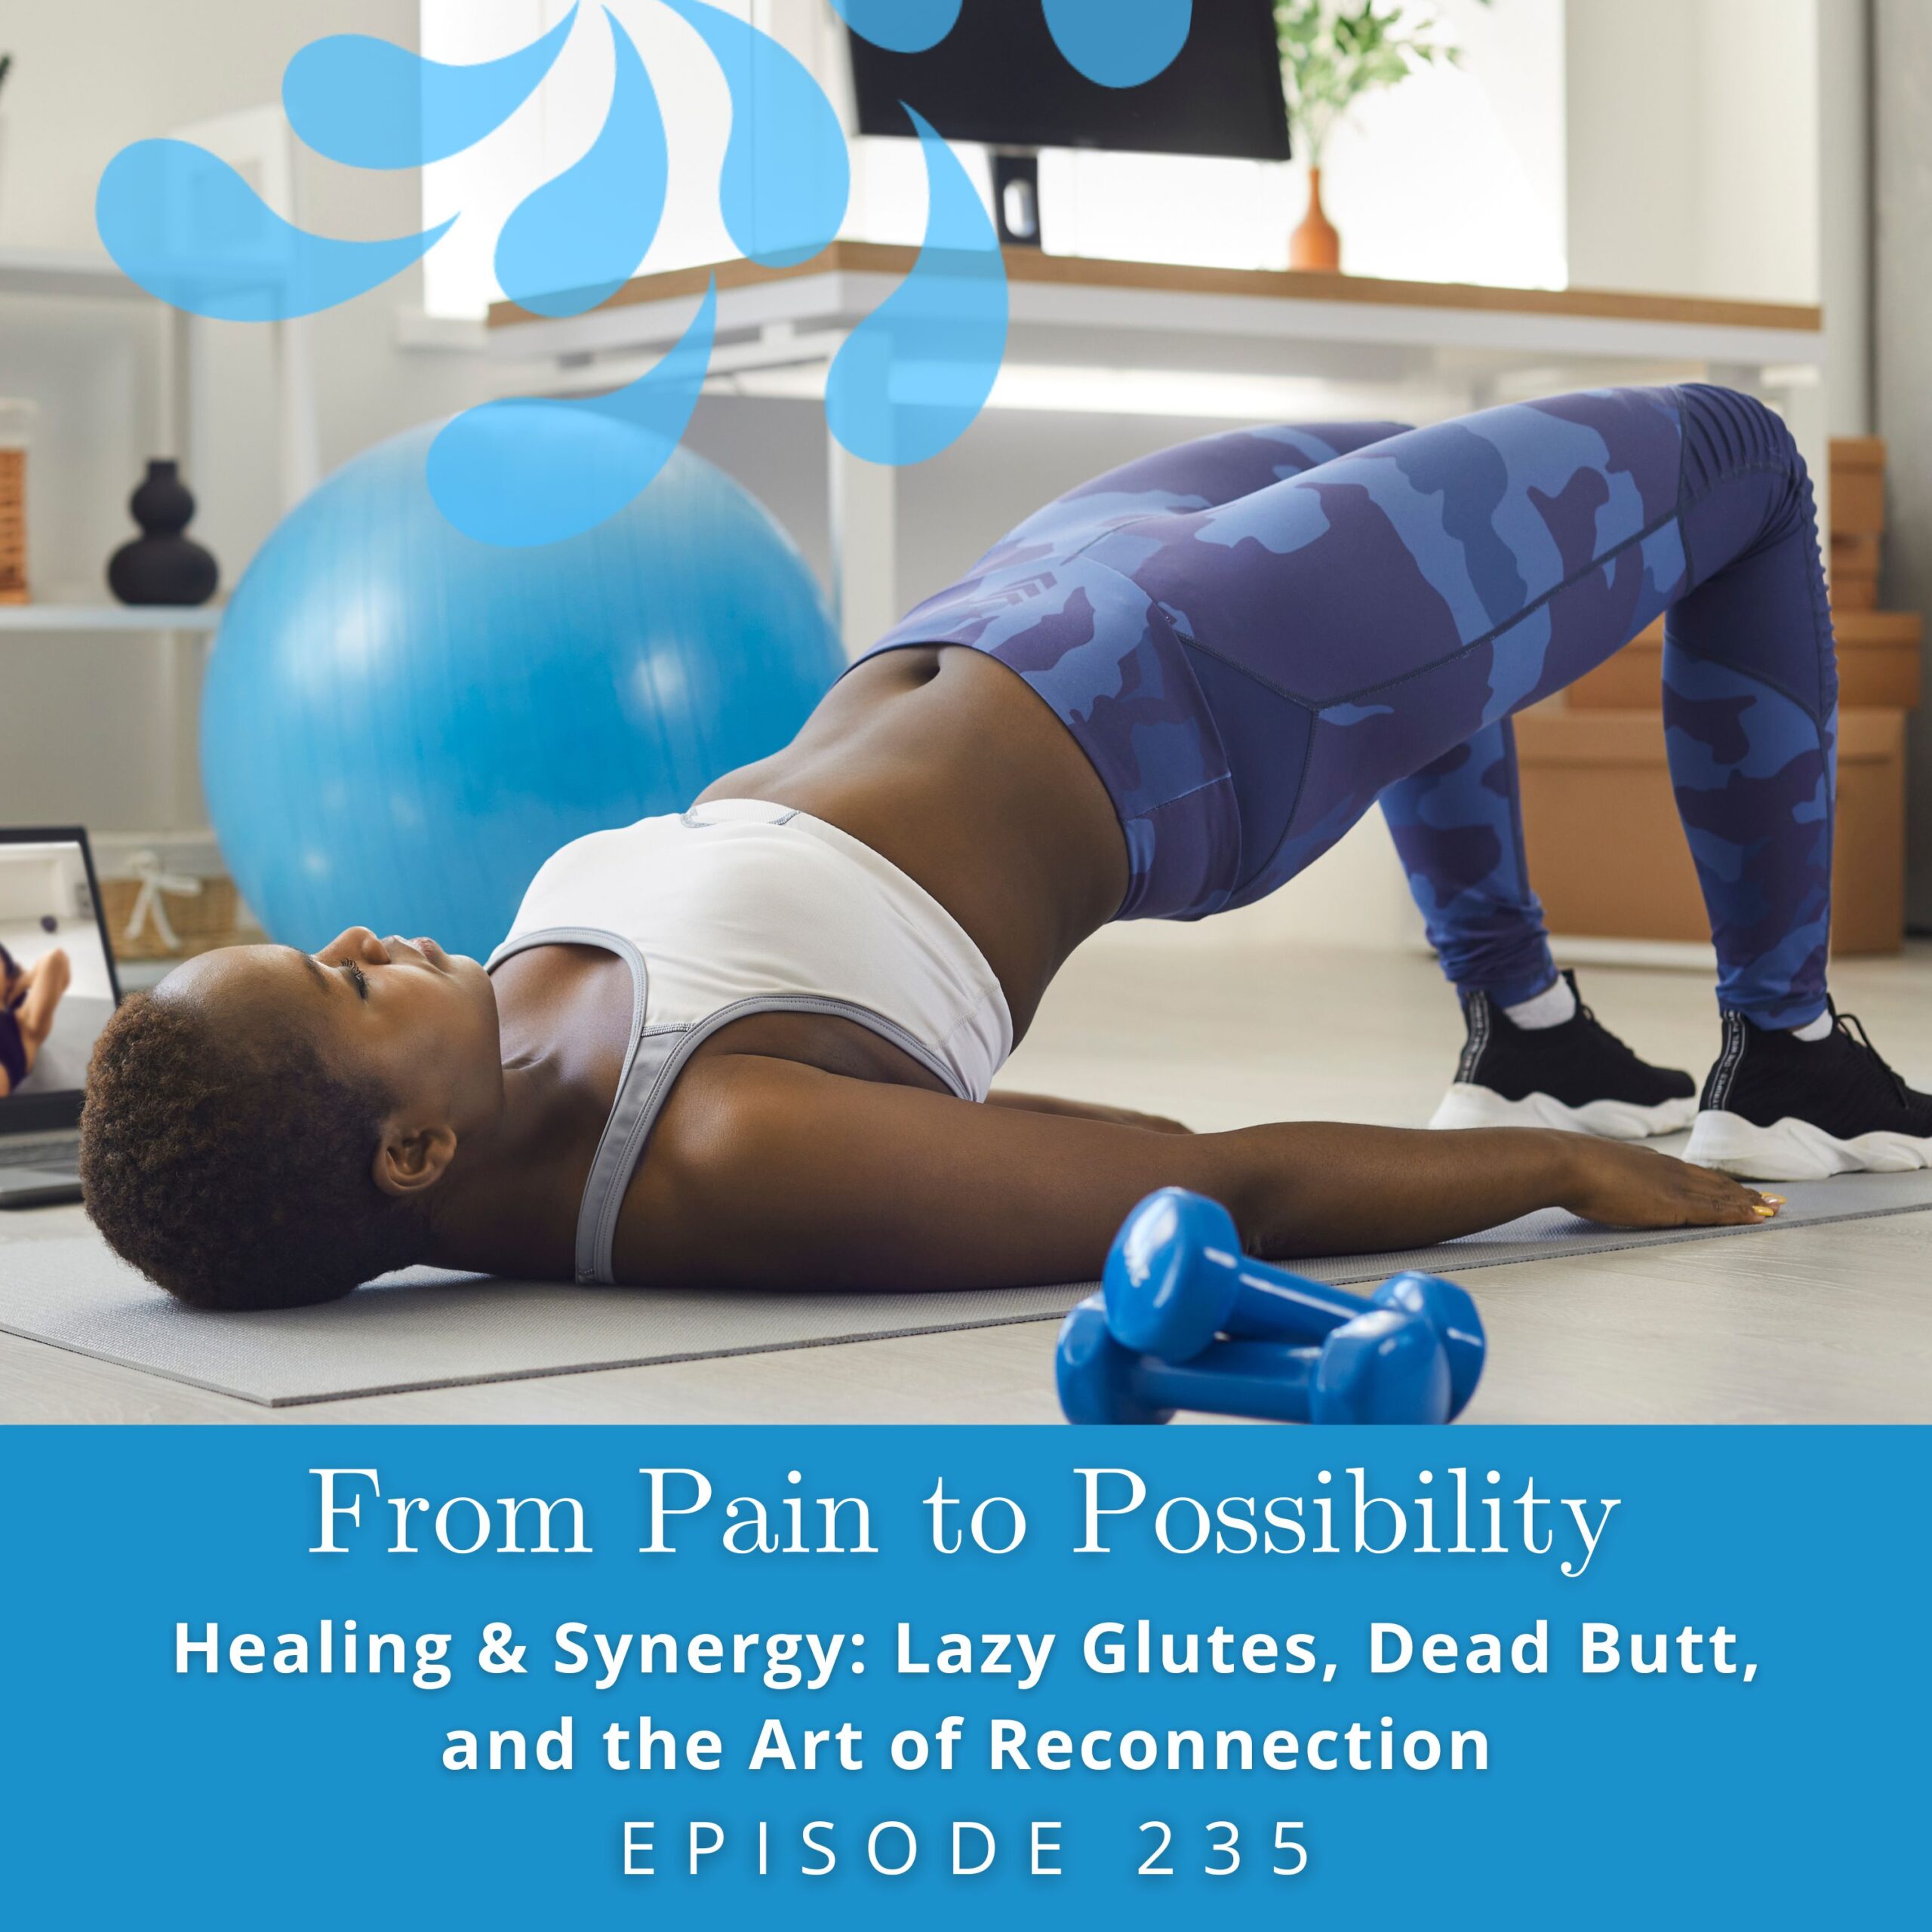 From Pain to Possibility with Susi Hately | Healing & Synergy: Lazy Glutes, Dead Butt, and the Art of Reconnection